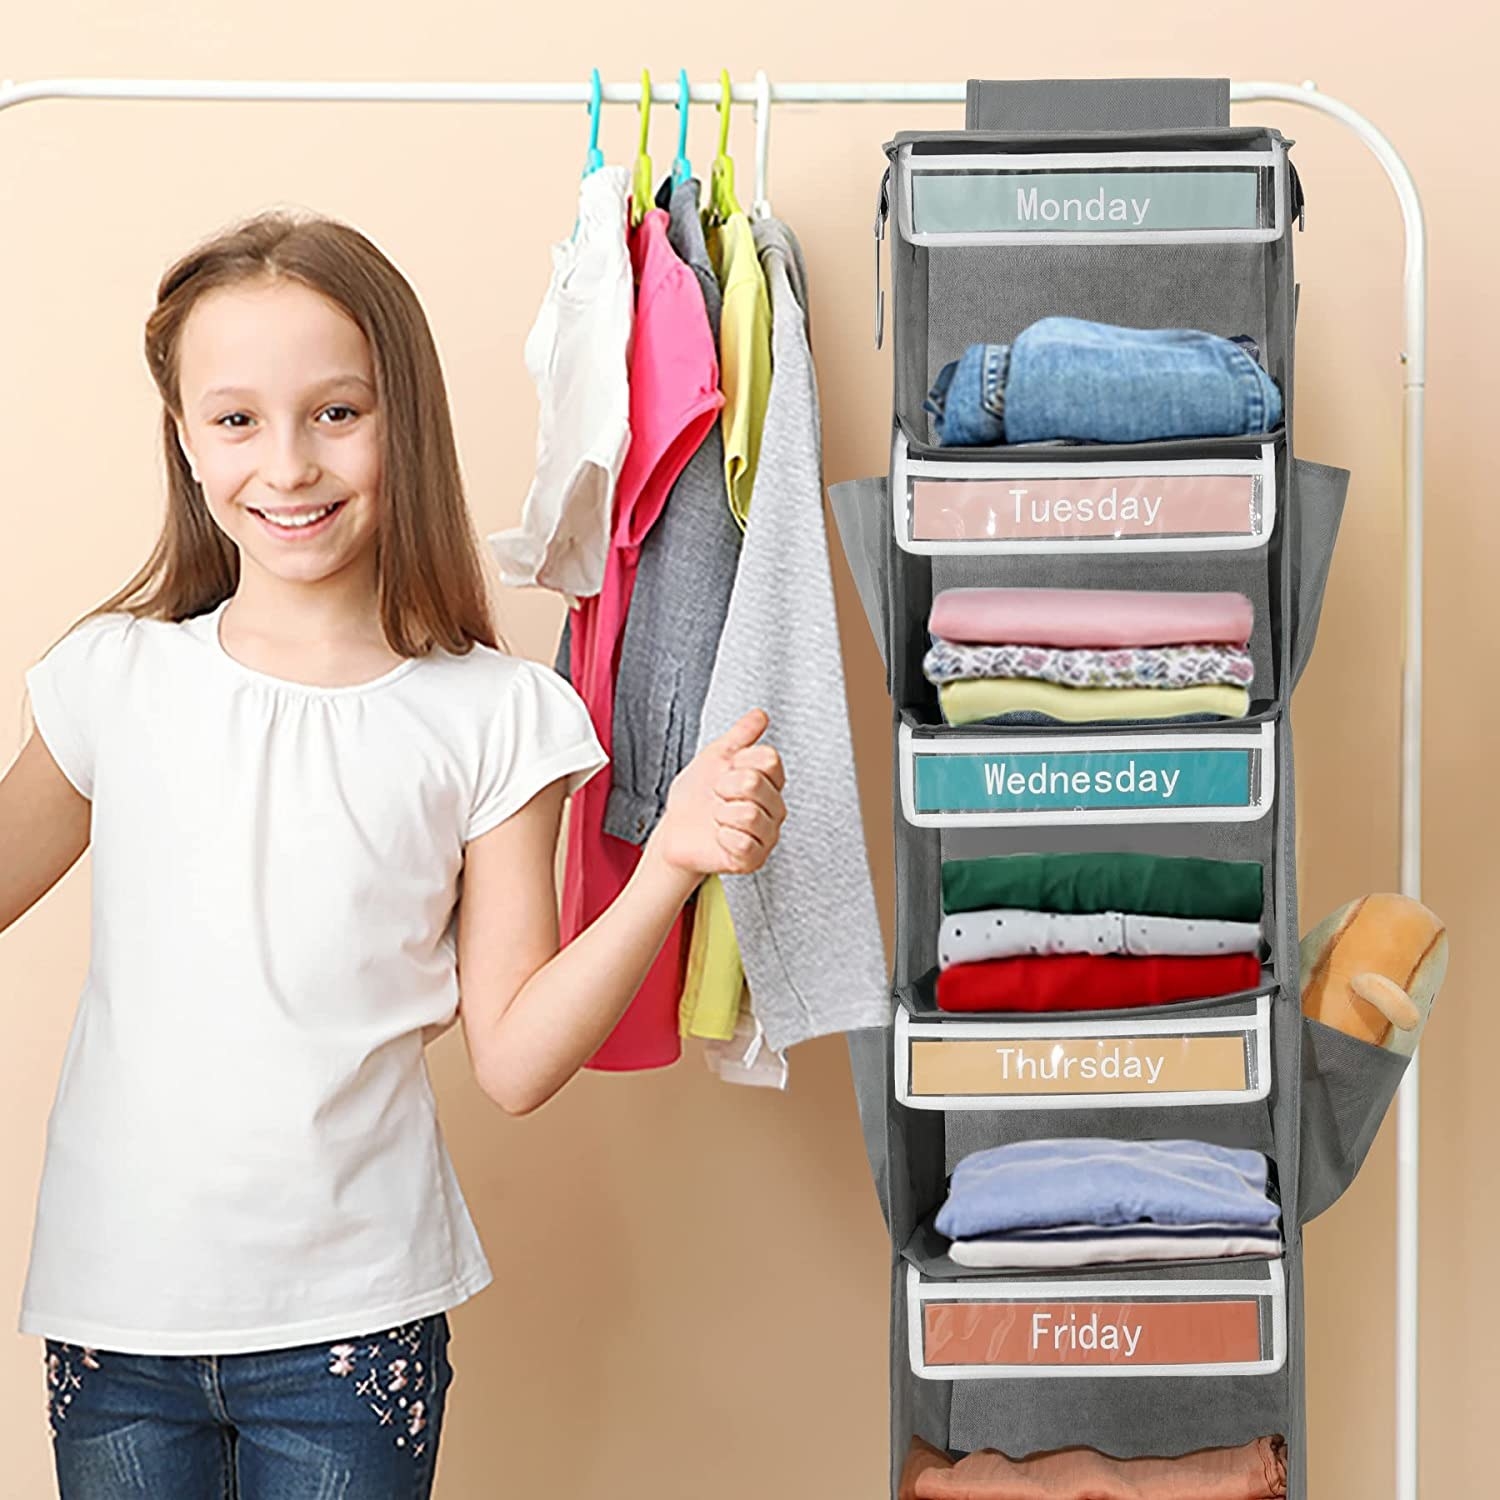 child standing beside vertical hanging days of the week cubby closet holder